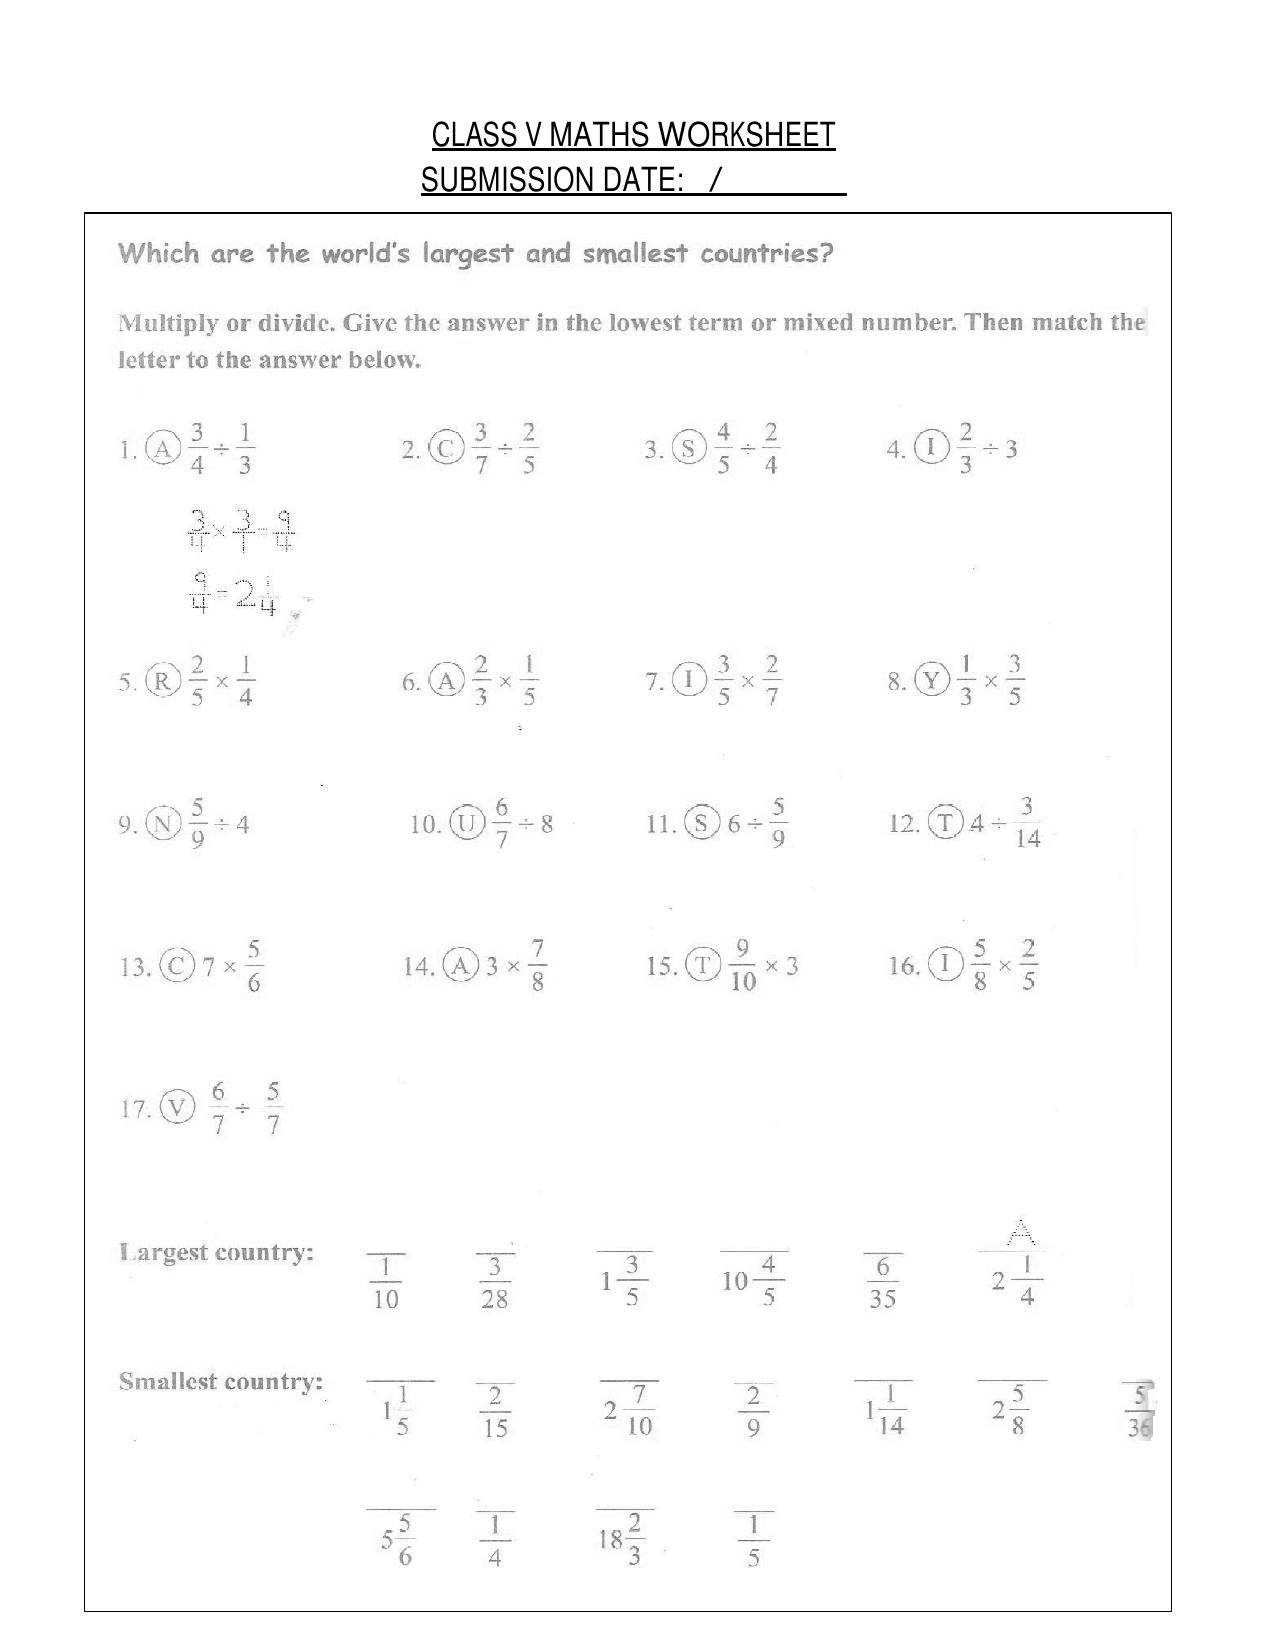 Worksheet for Class 5 Maths Largest Smallest Assignment - Page 1